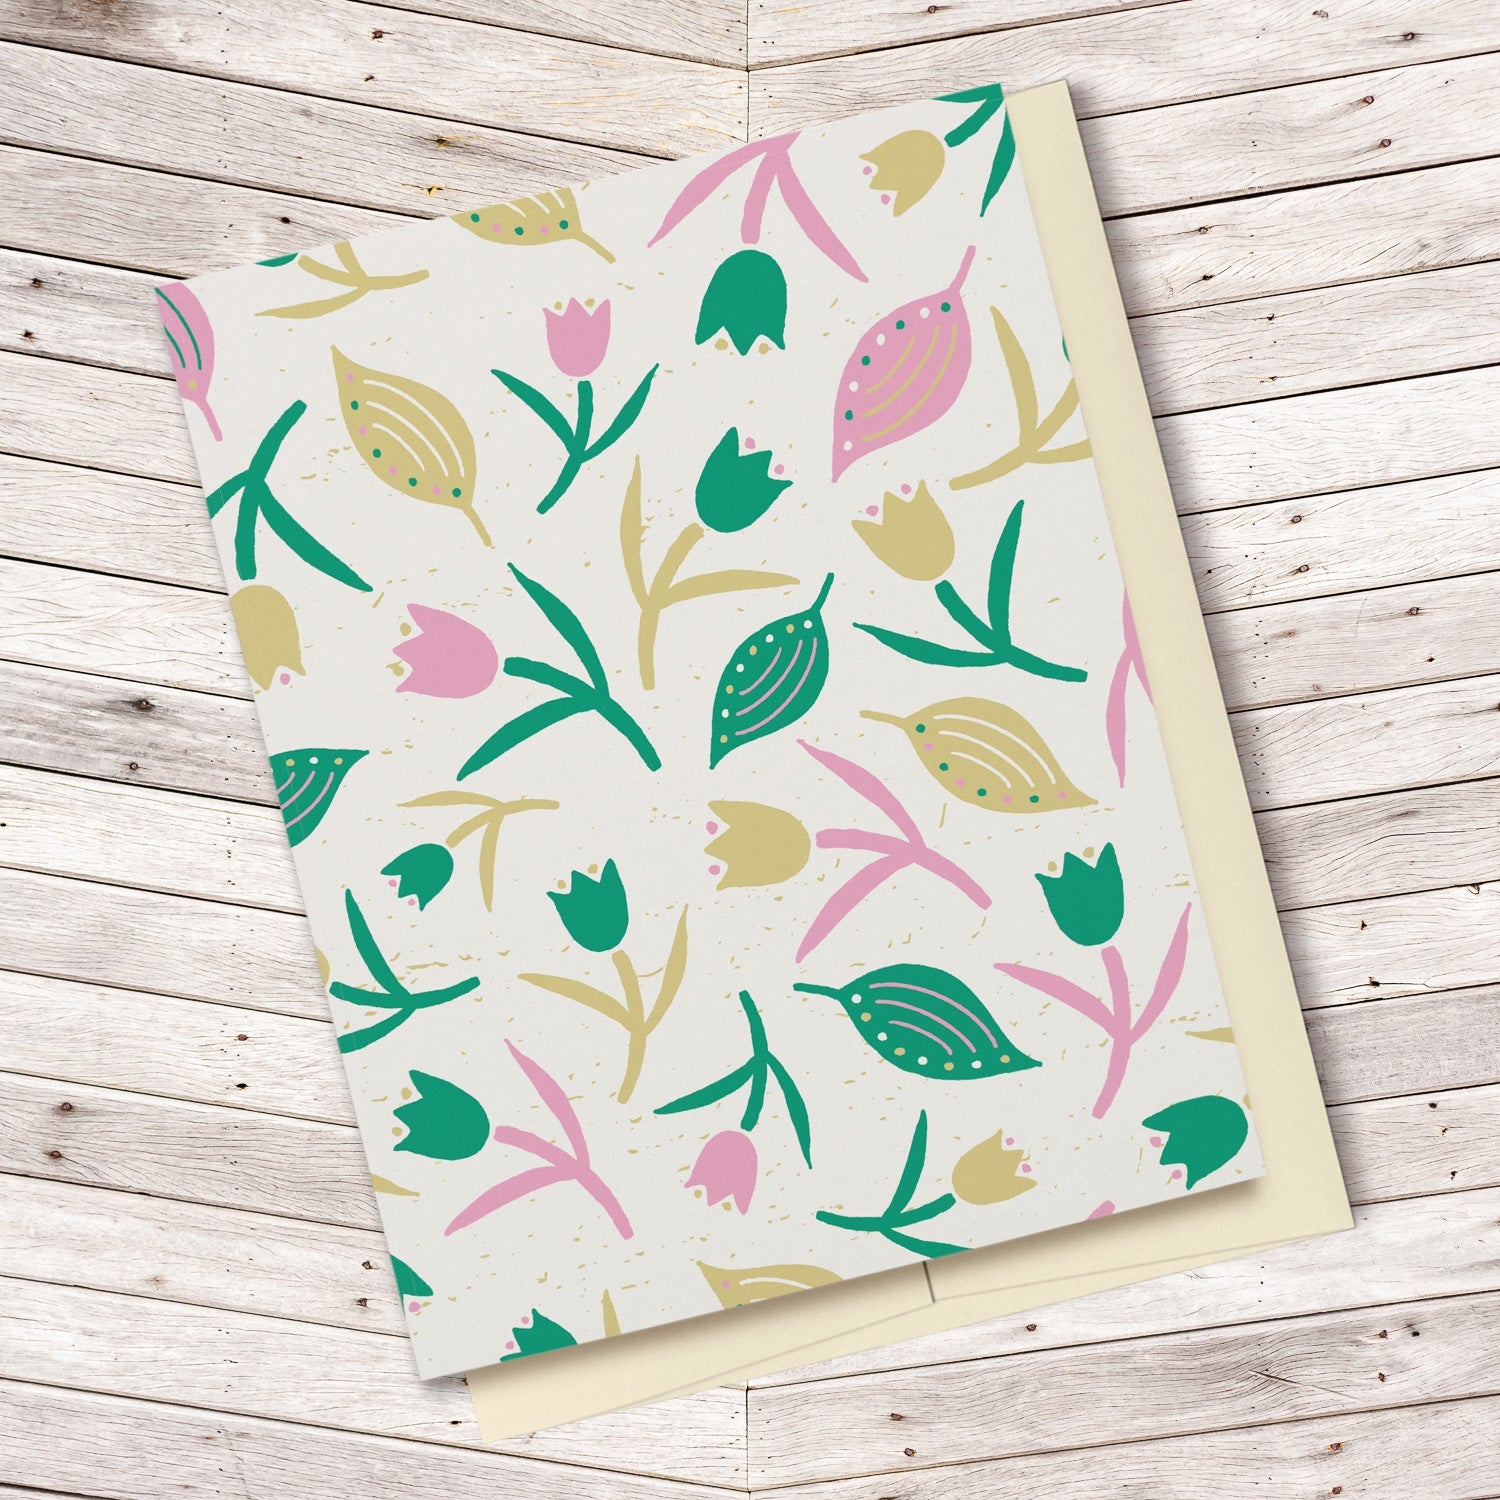 Tulips & Leaves Cream, Green & Pink Blank Card features a pattern with tulips and leaves in shades of green and pink on a cream background. The pattern extends over the back of the card too. Displayed on a wooden background.